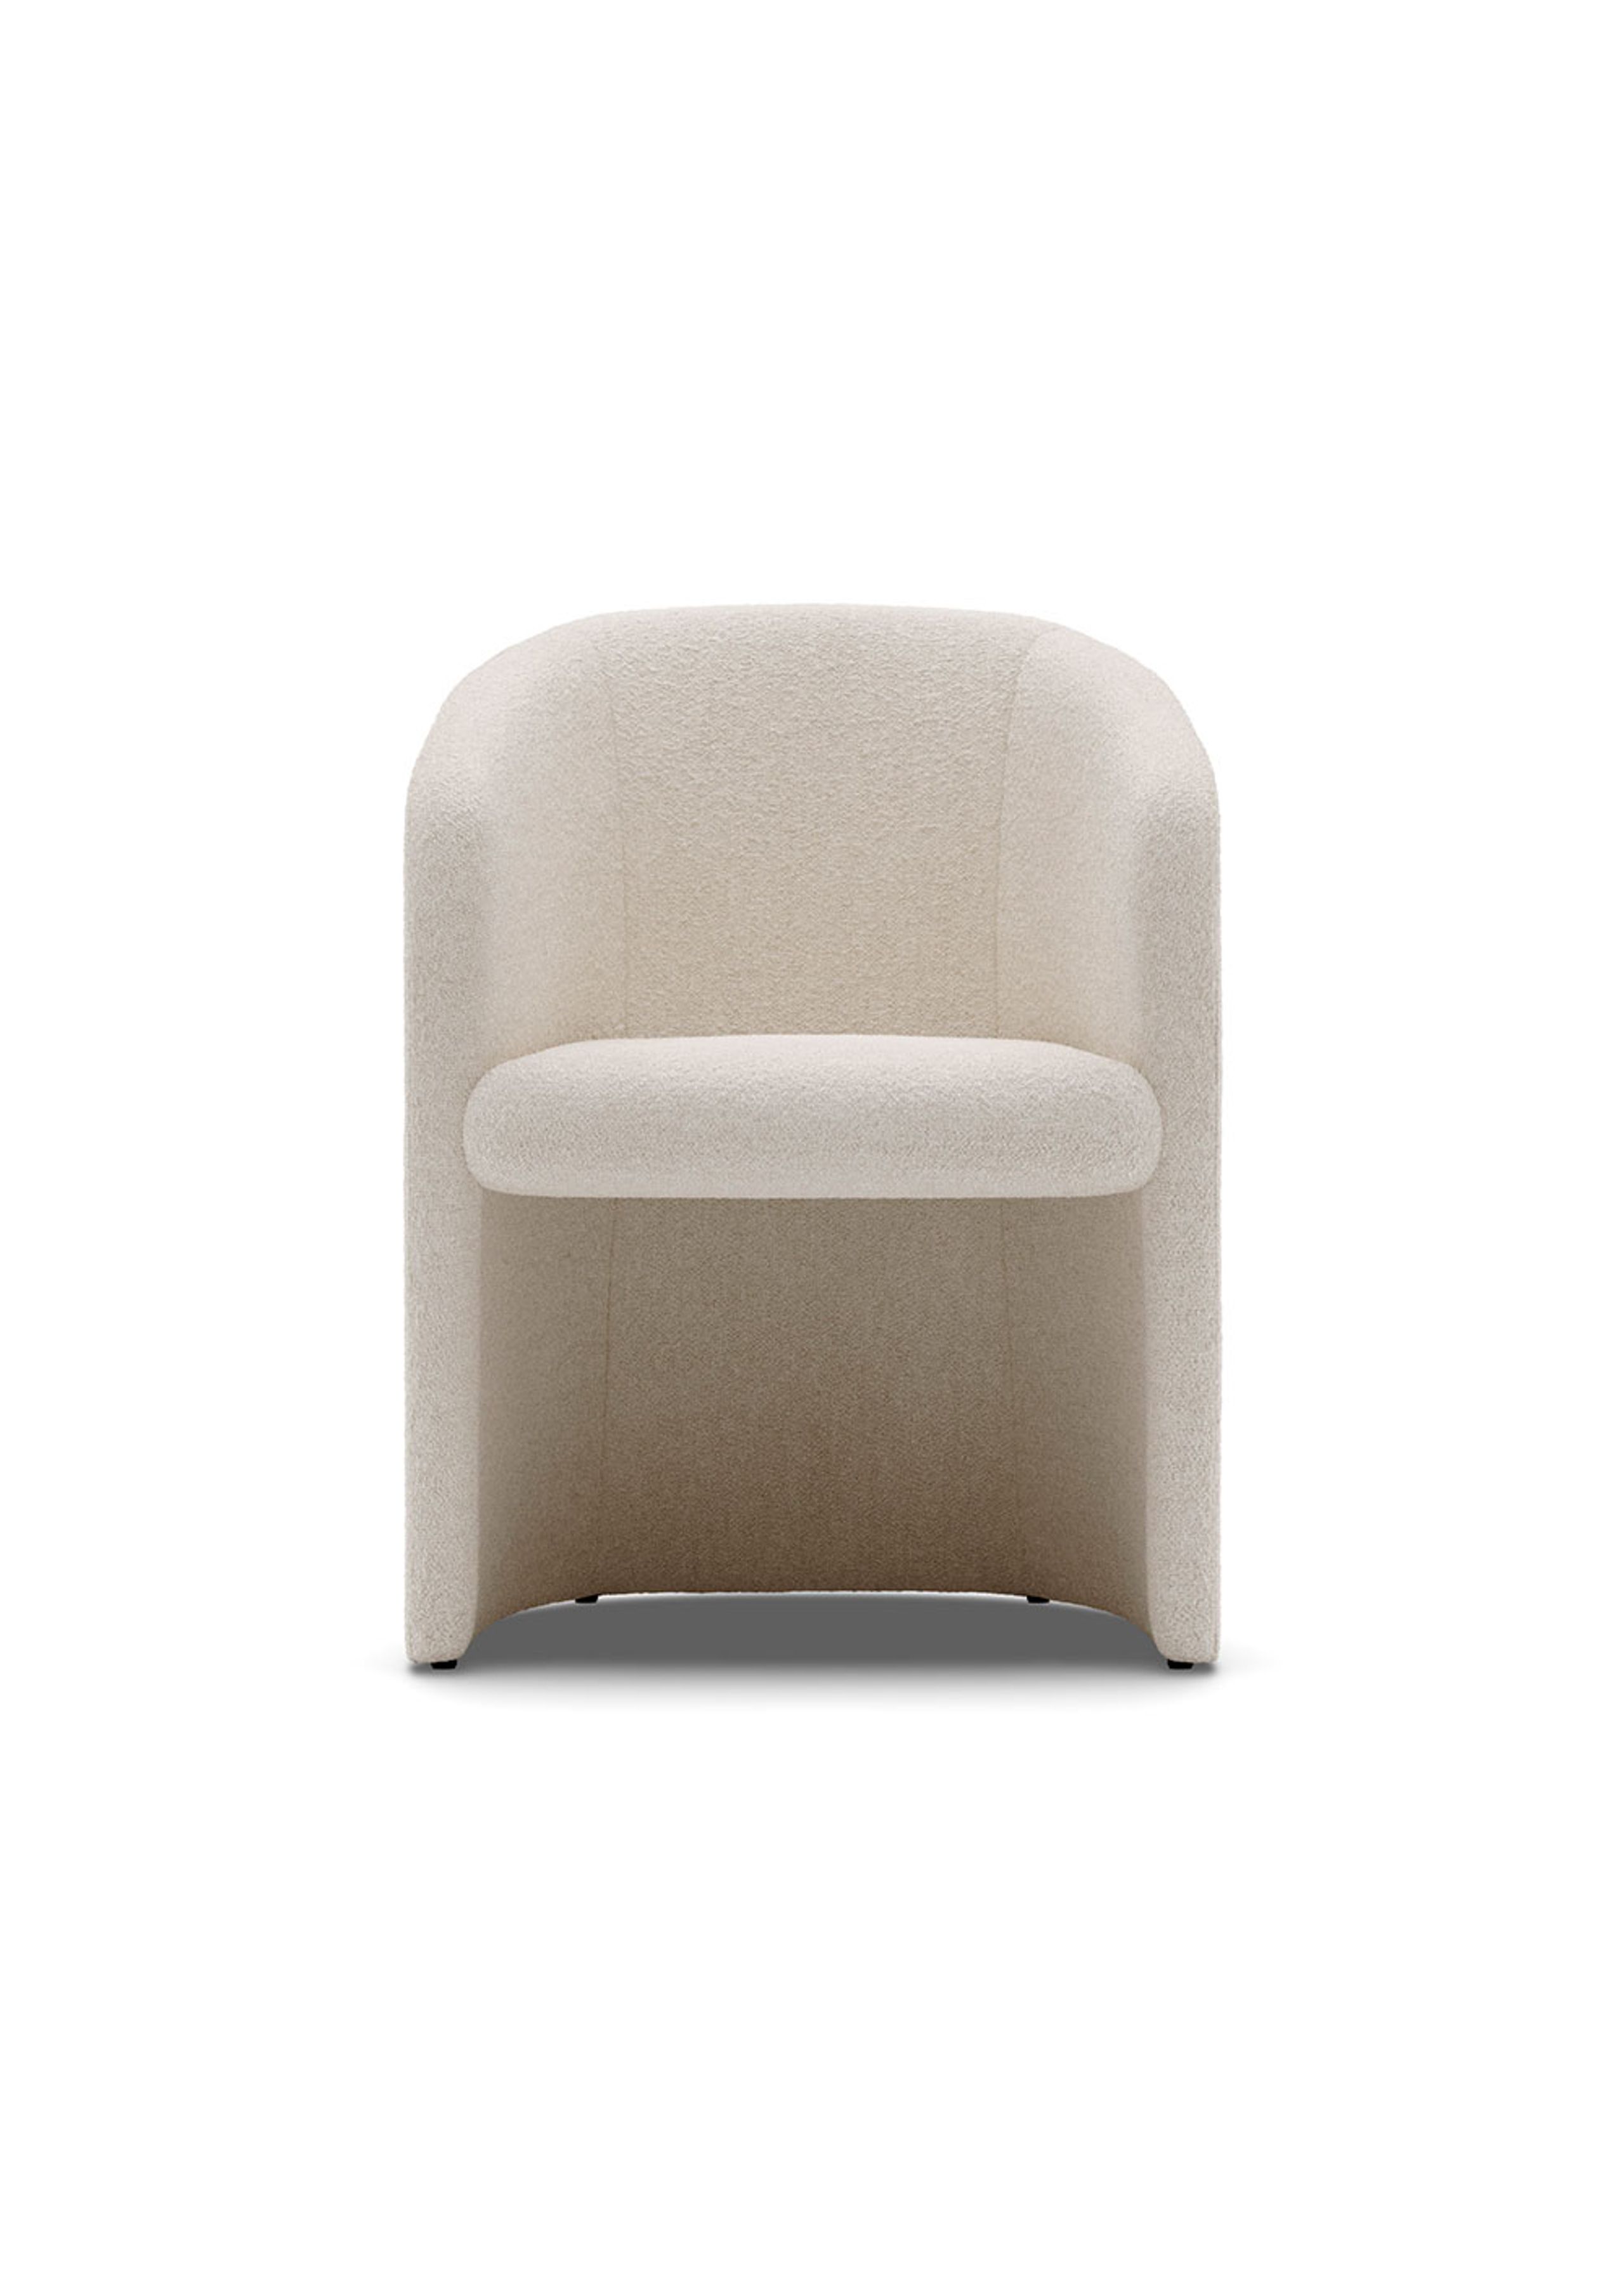 New Works - Loungesessel - Covent Club Chair - Nevotex Barnum Lana 24